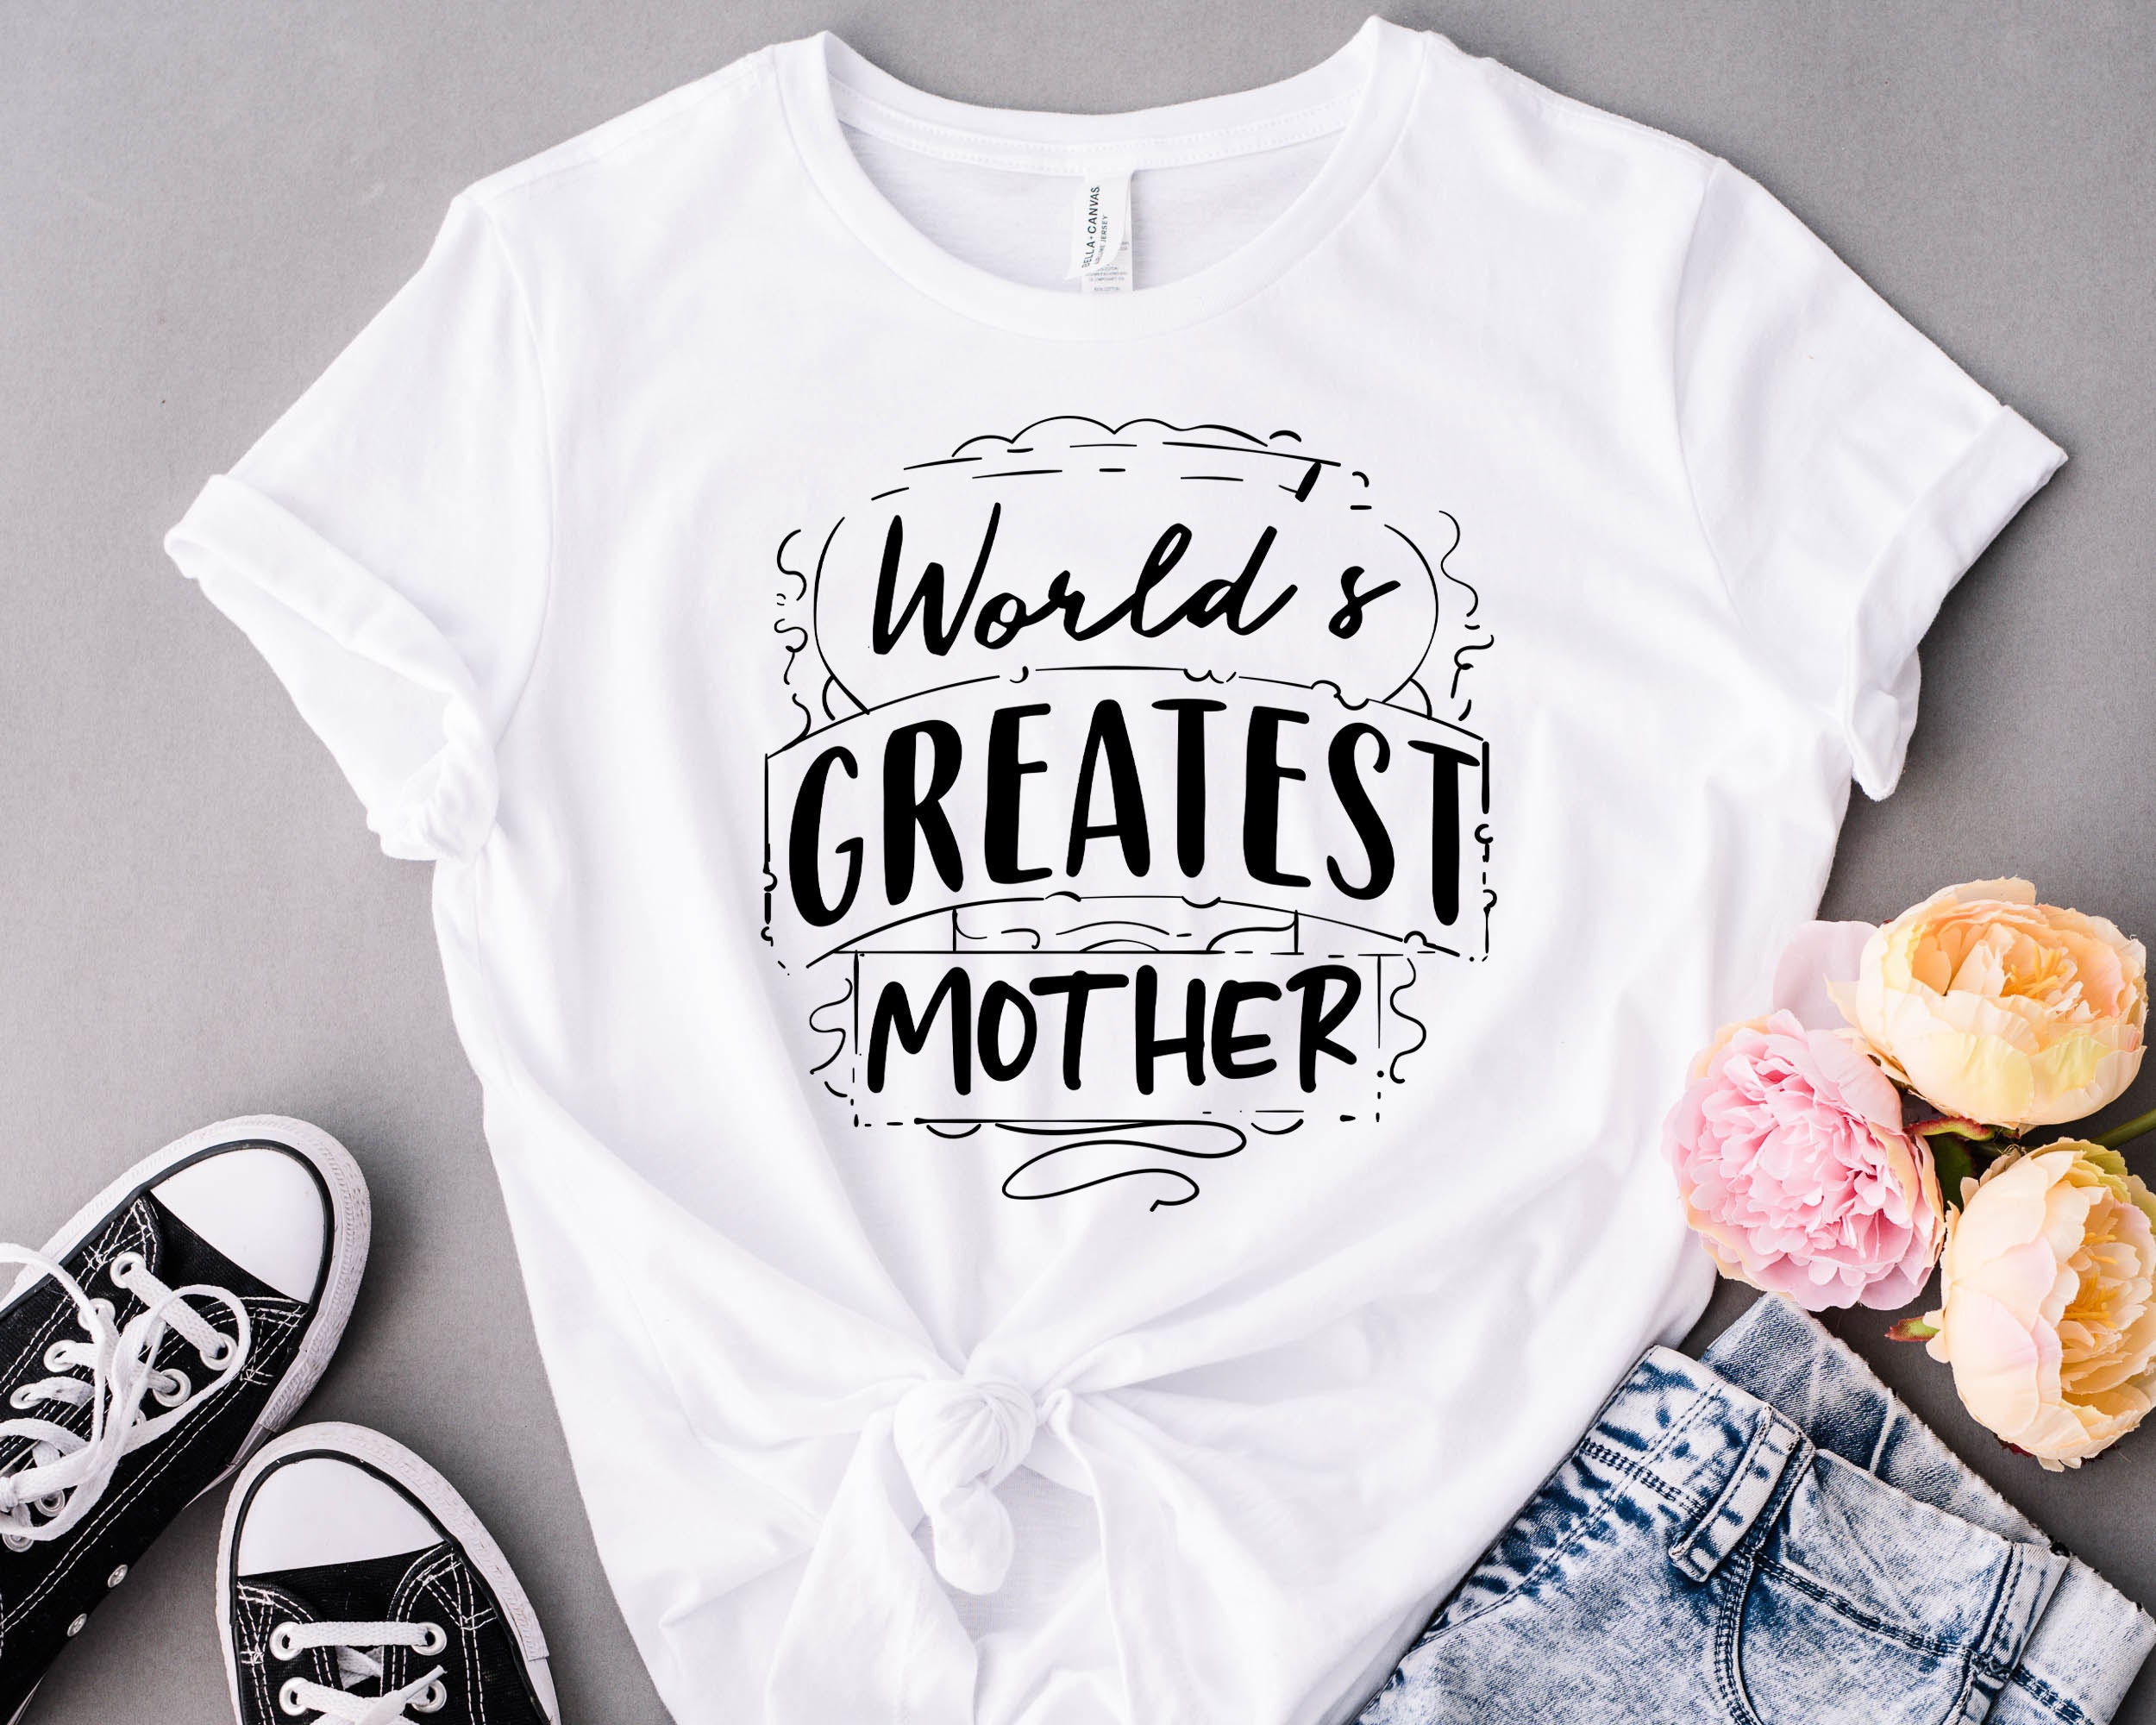 Worlds Greatest Mother T Shirt Mom Shirt Great Mom Shirt Gift For Mom Mothers Day Gift Full Size Up To 5xl